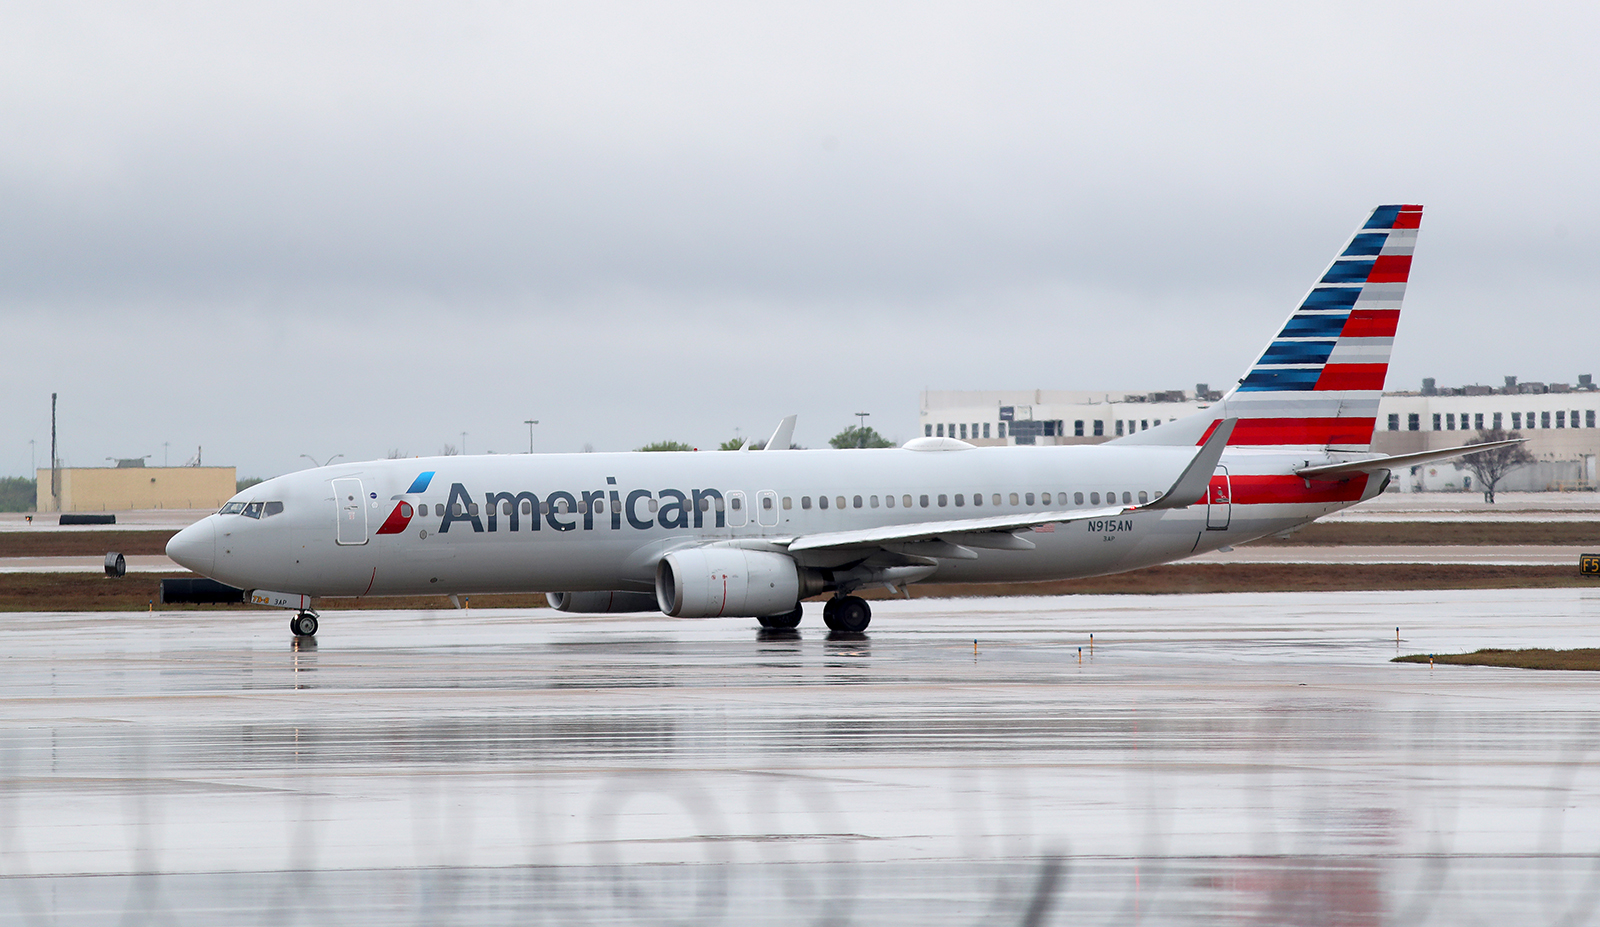 A view of an American Airlines jet at Dallas Fort Worth International Airport on March 13, 2020 in Dallas, Texas. 